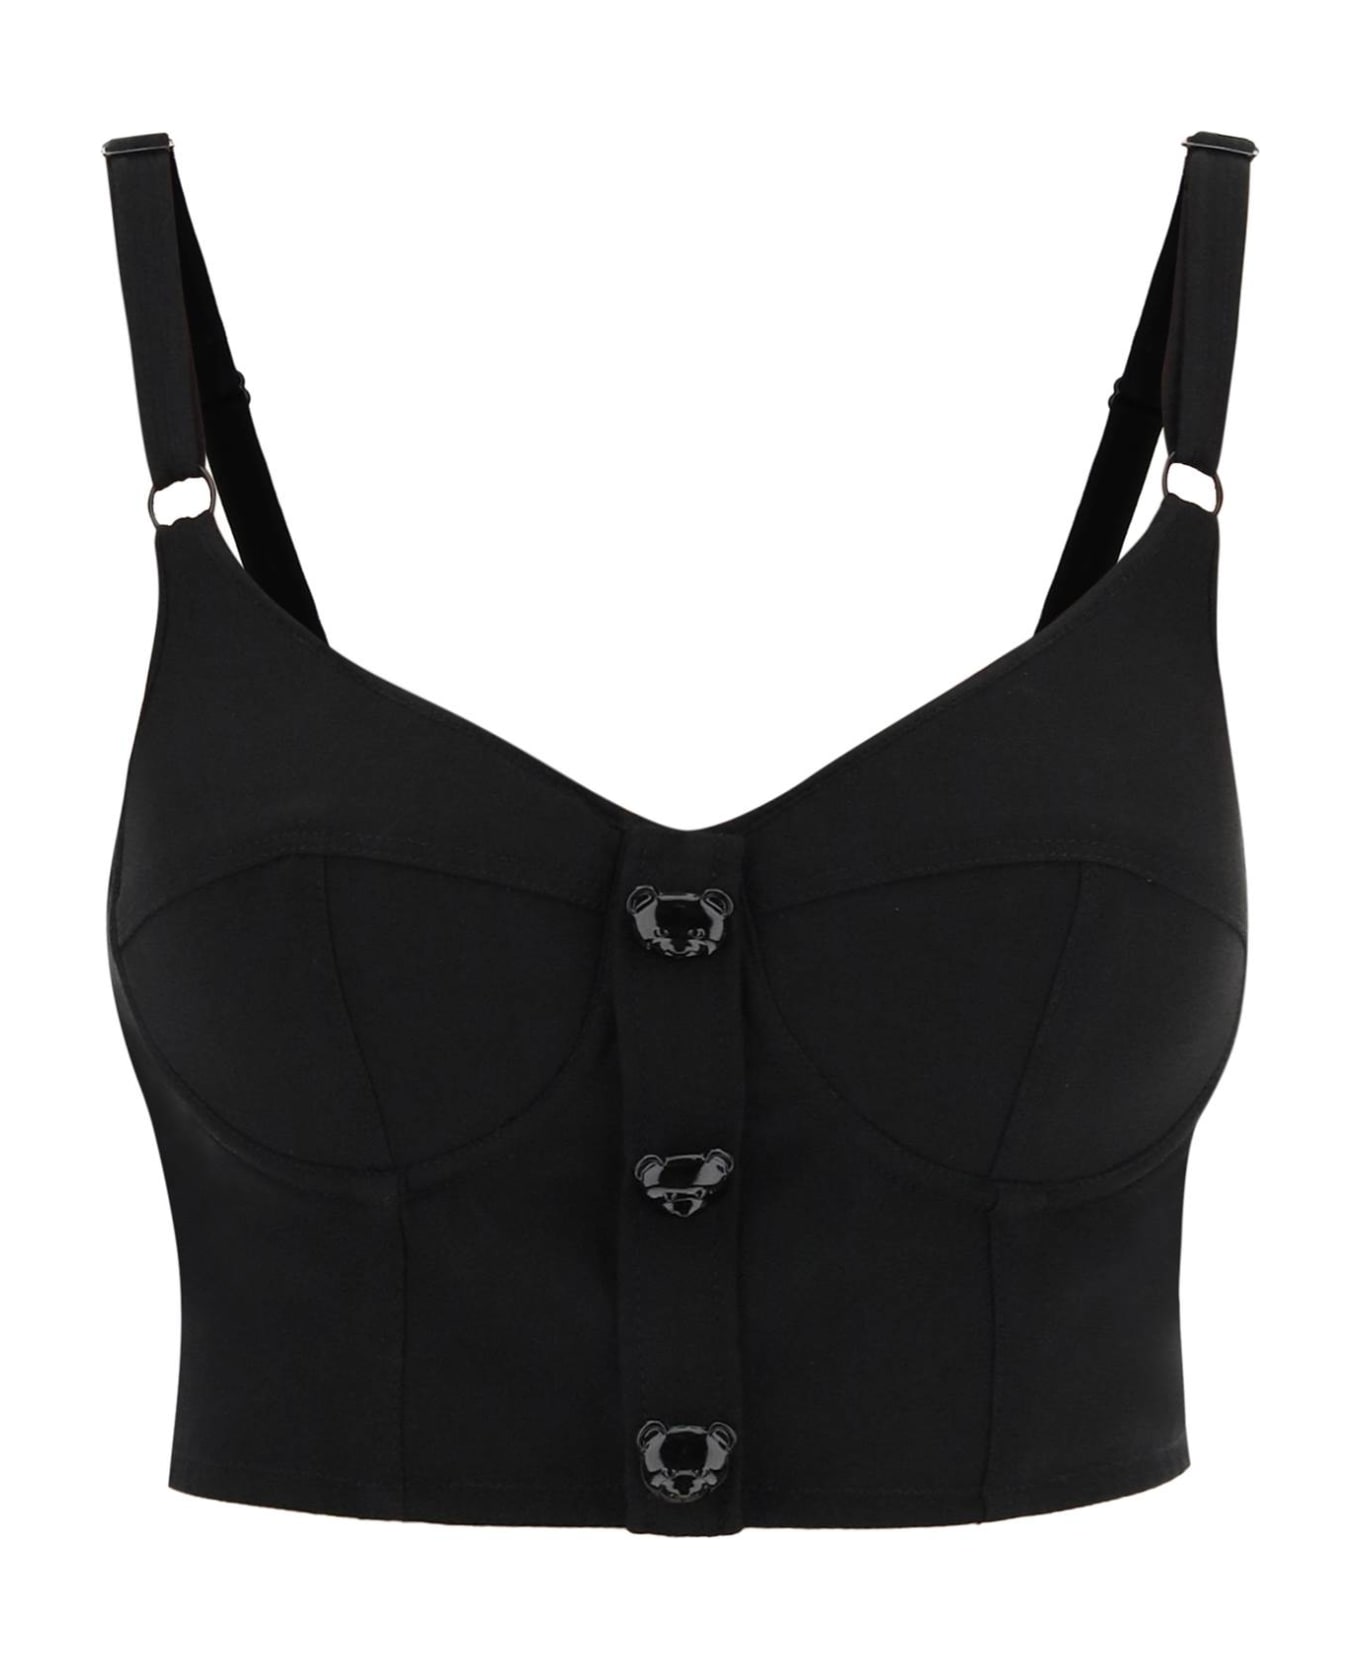 Moschino Bustier Top With Teddy Bear Buttons - FANTASIA NERO (Black)